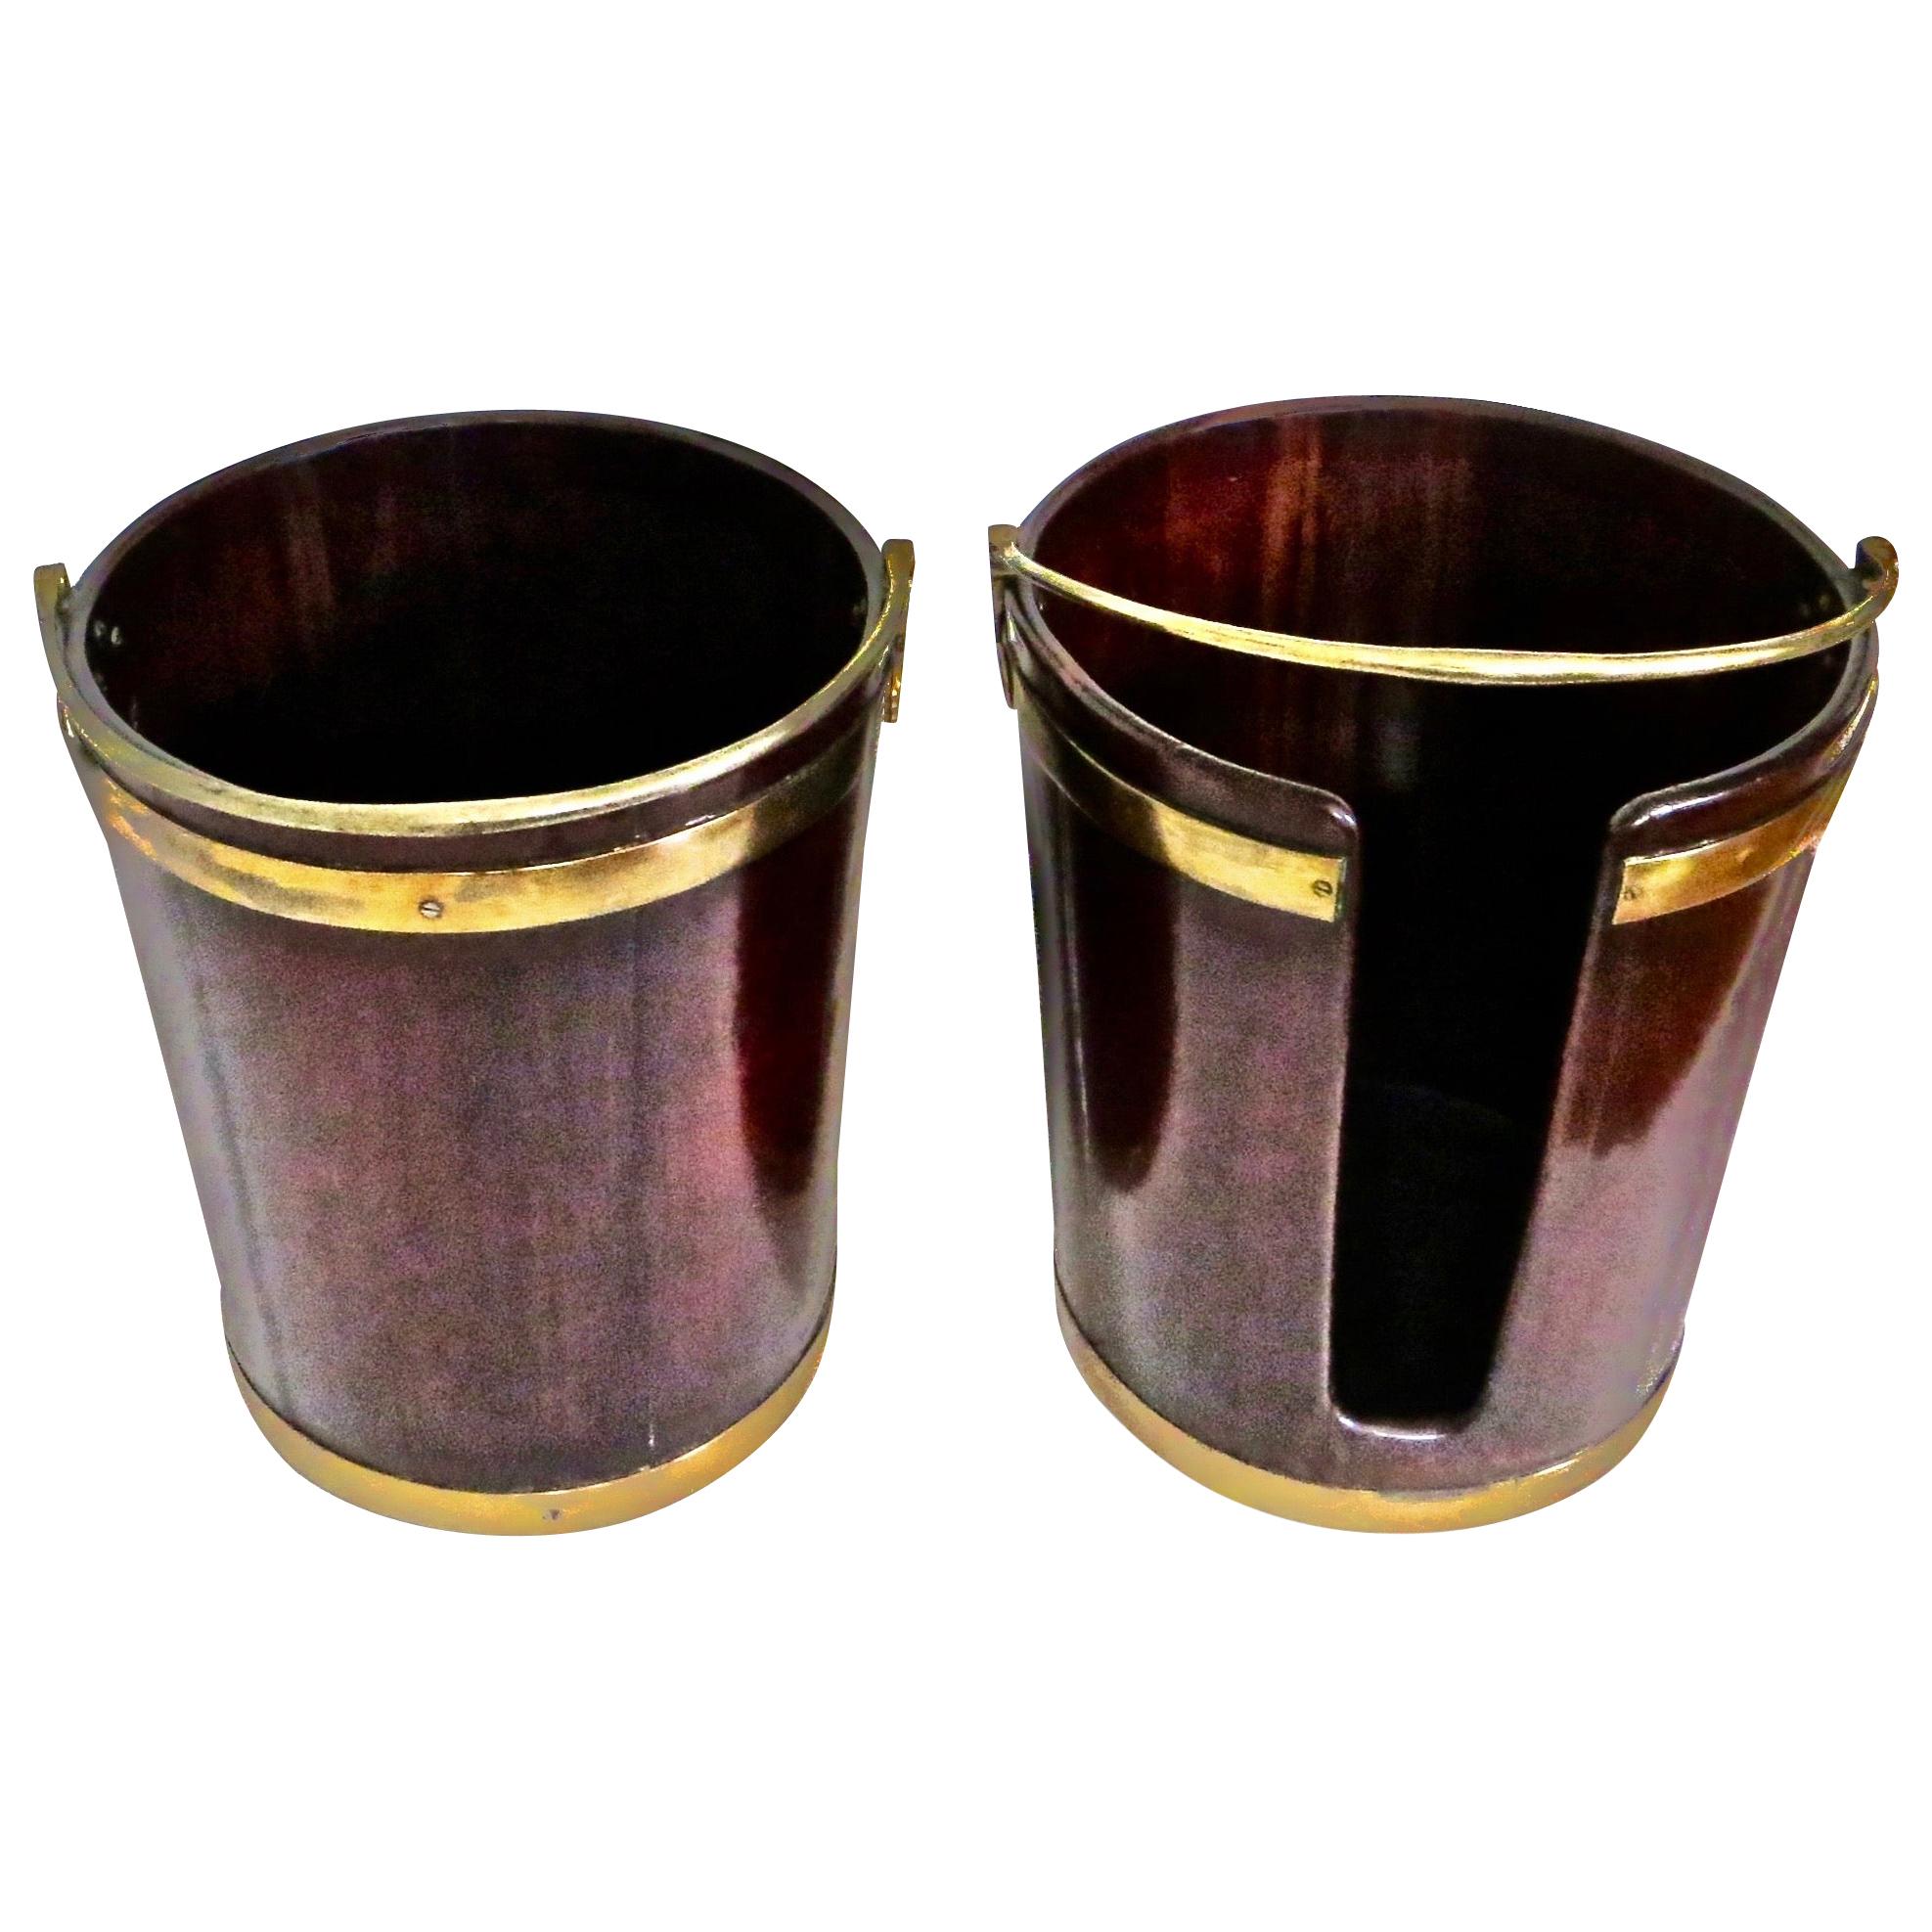 Pair of George III Mahogany Brass-Bound Buckets; 1 Peat and 1 Plate, English